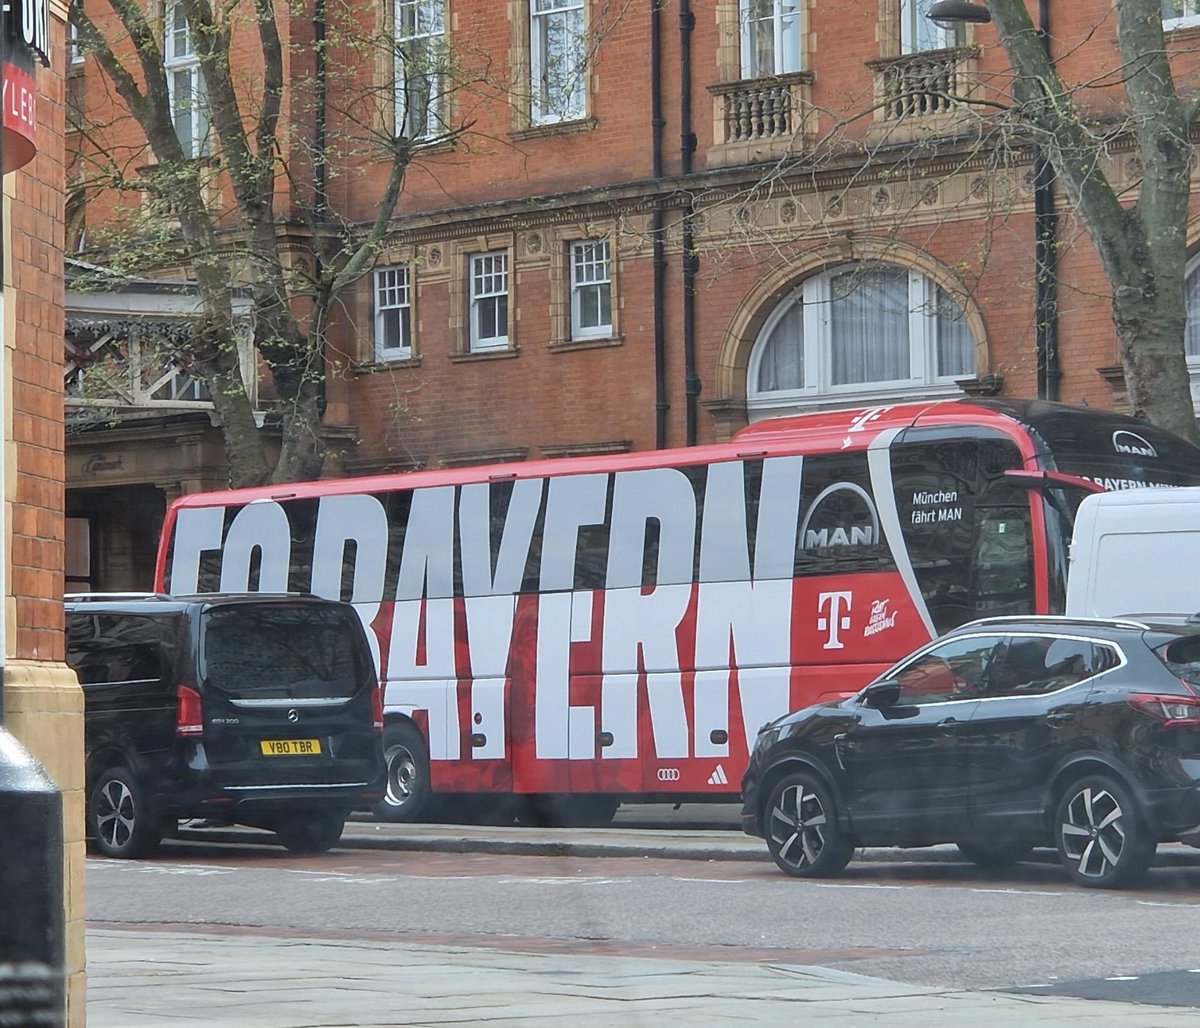 FC Bayern Munich have parked their bus in London #COYG